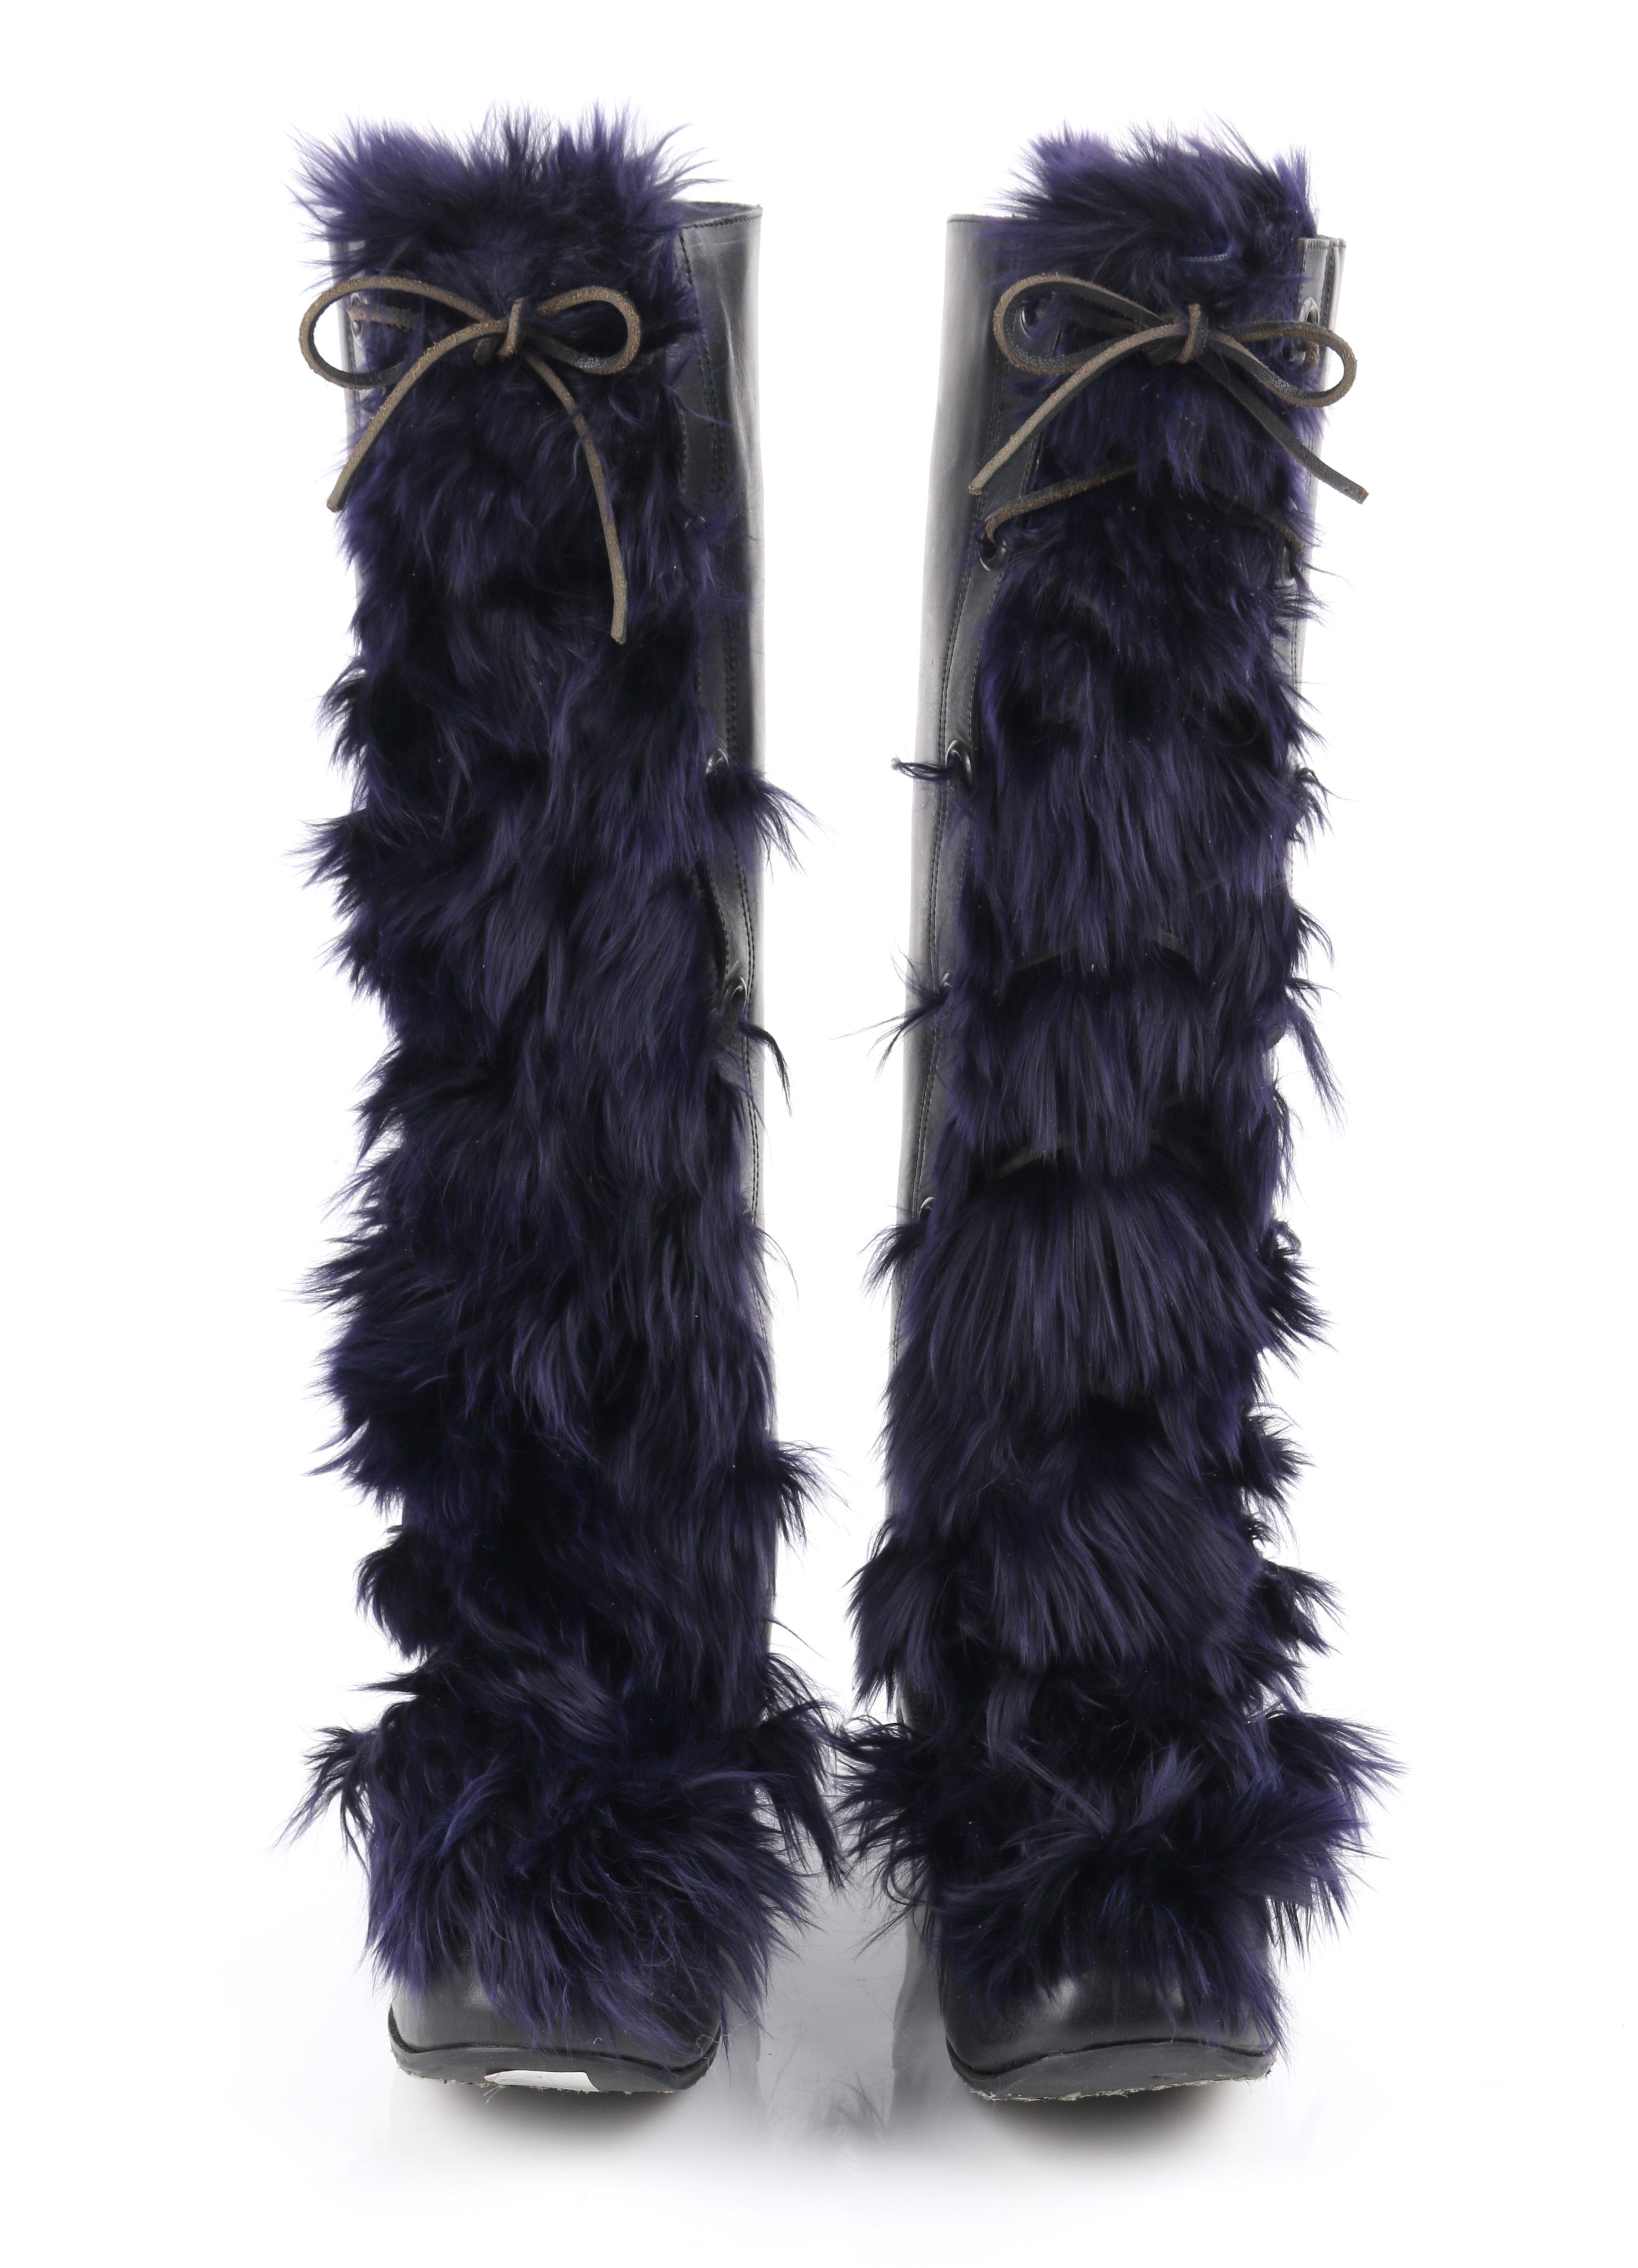 Women's MARNI Black Leather & Navy Blue Angora Fur Lace Up Knee-High Apres Boots